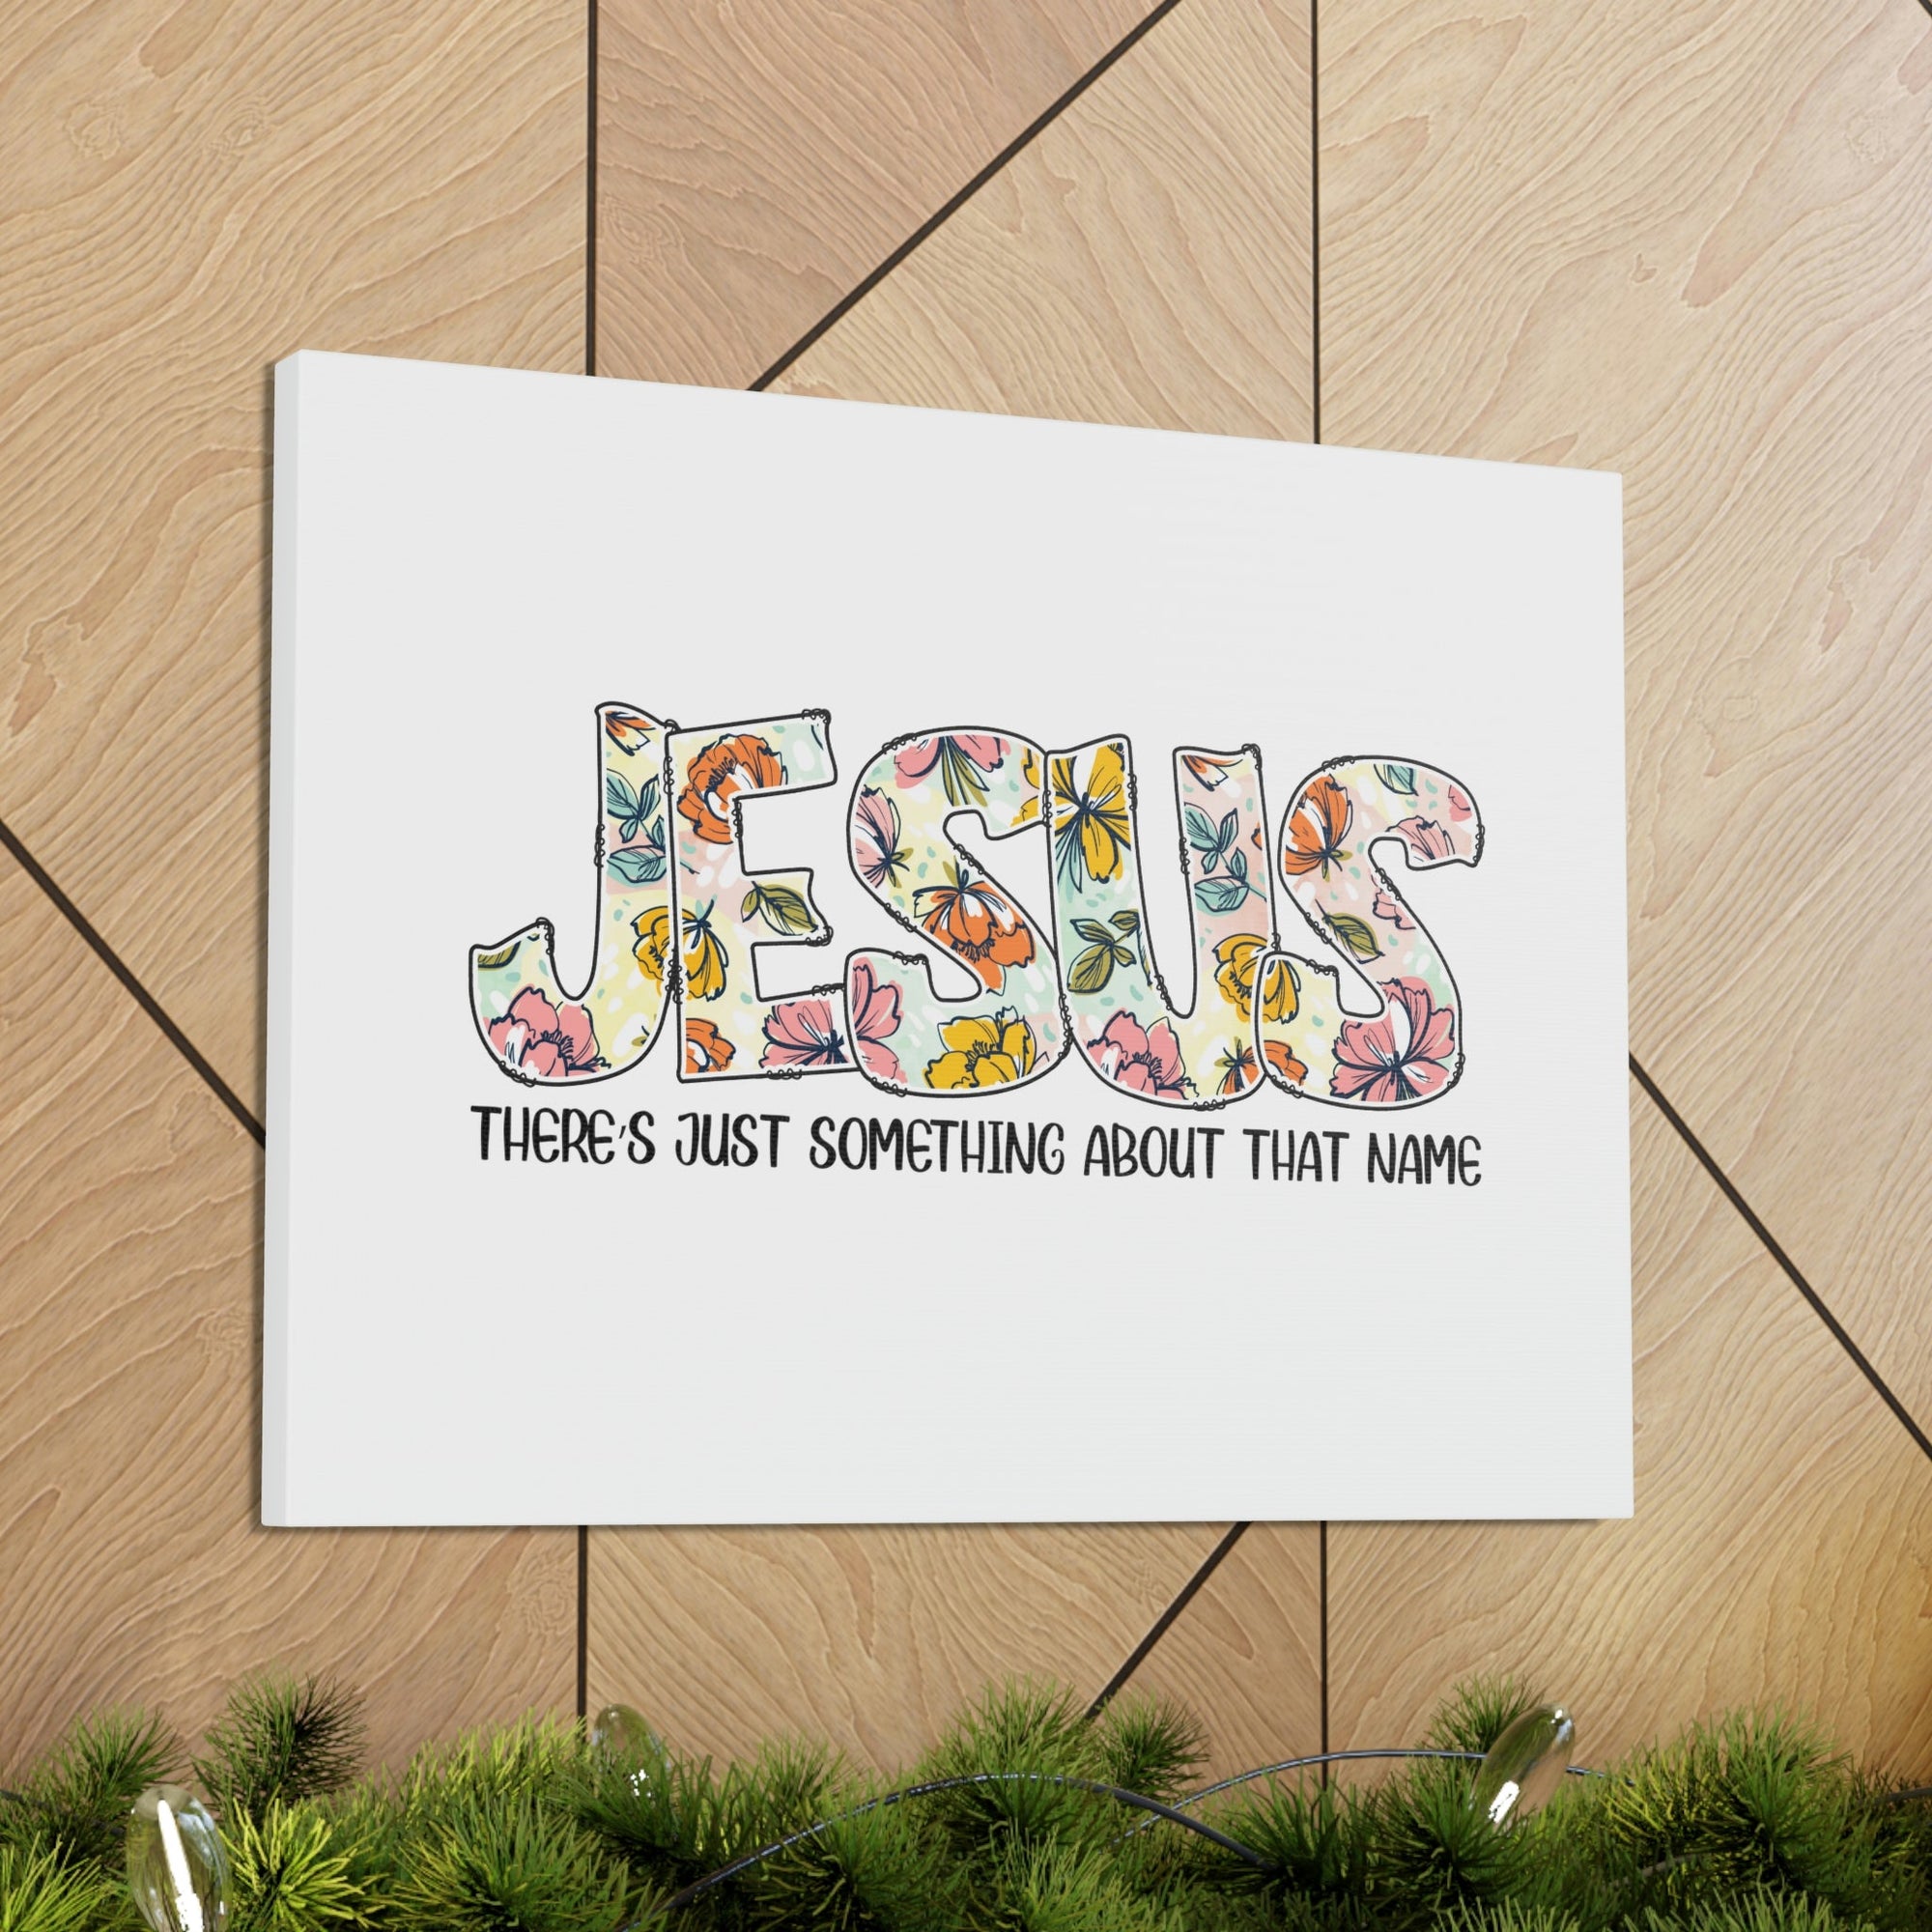 Scripture Walls Jesus There's Just Something Hebrews 12:2 Flowers Christian Wall Art Bible Verse Print Ready to Hang Unframed-Express Your Love Gifts